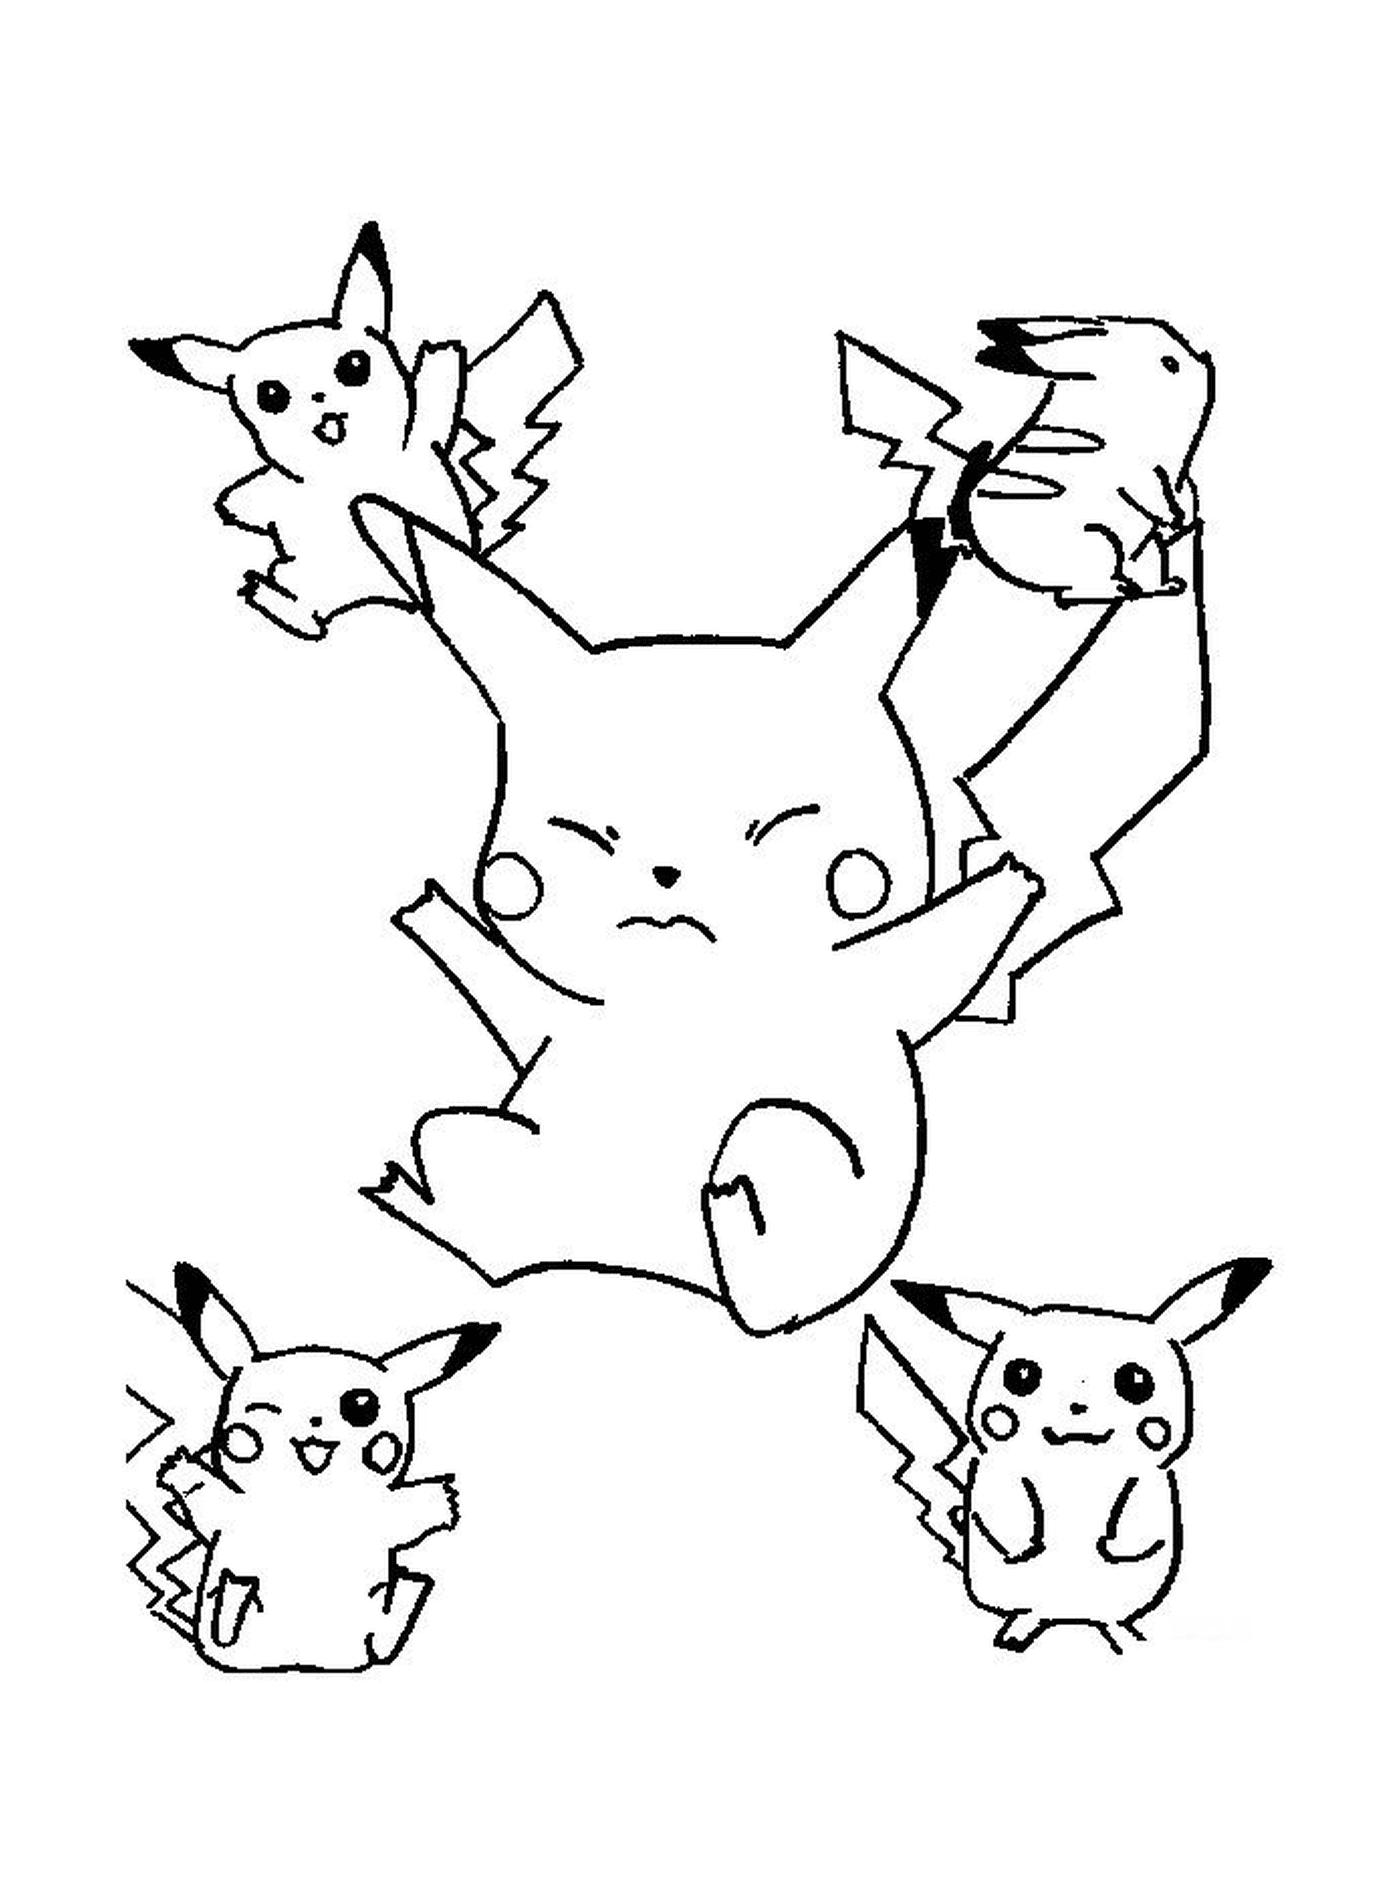  A group of Pikachu jumping in the air 